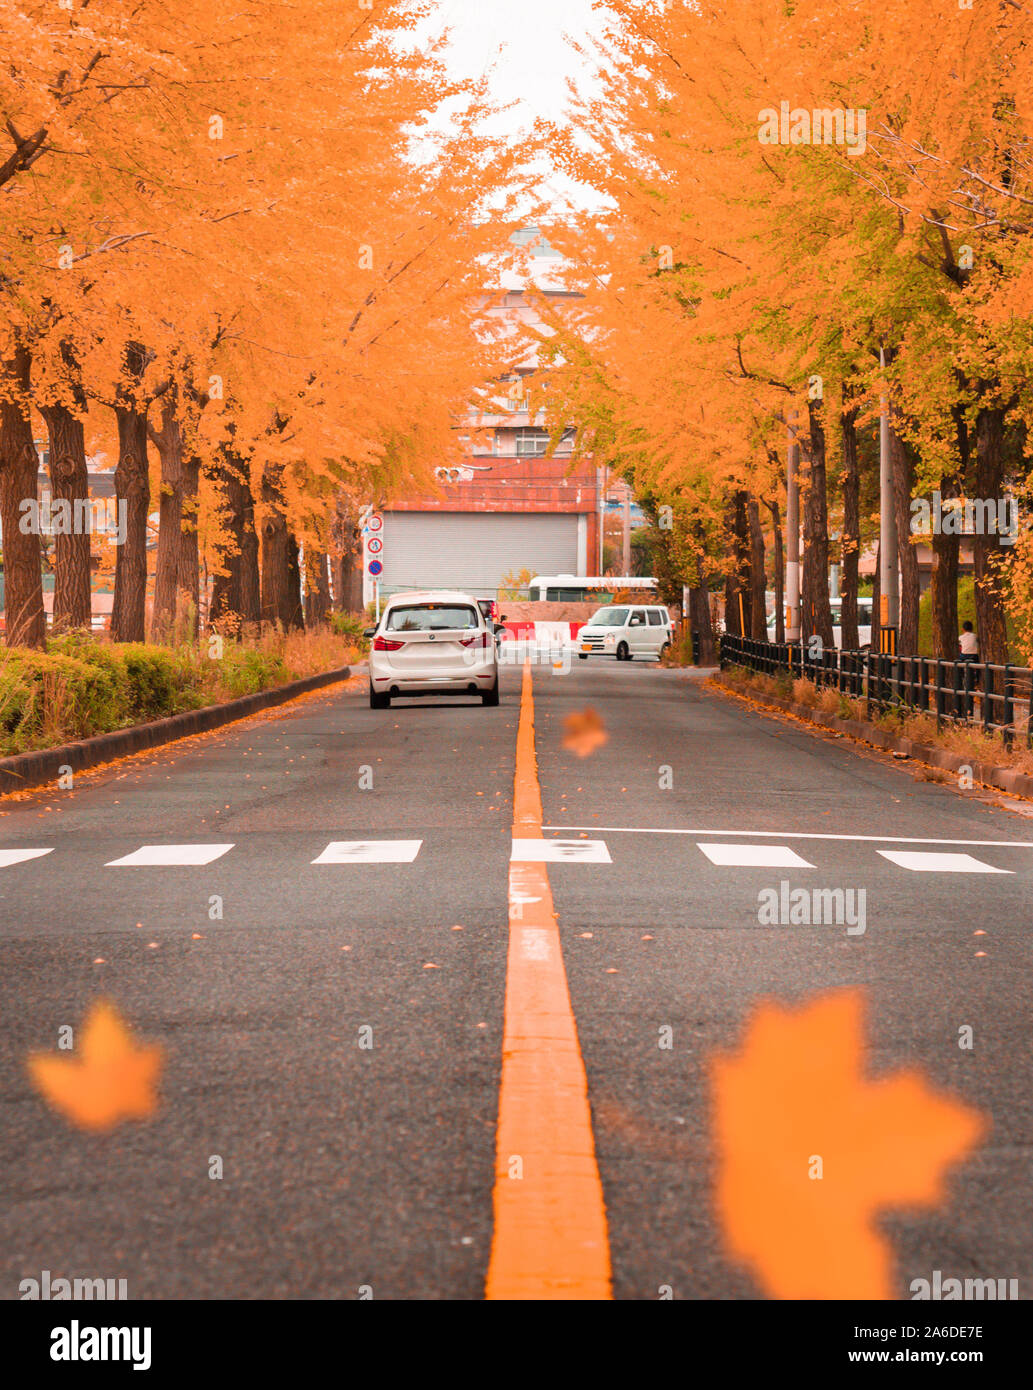 A road or a street with orange falling leaves from trees in autumn or fall season. Stock Photo